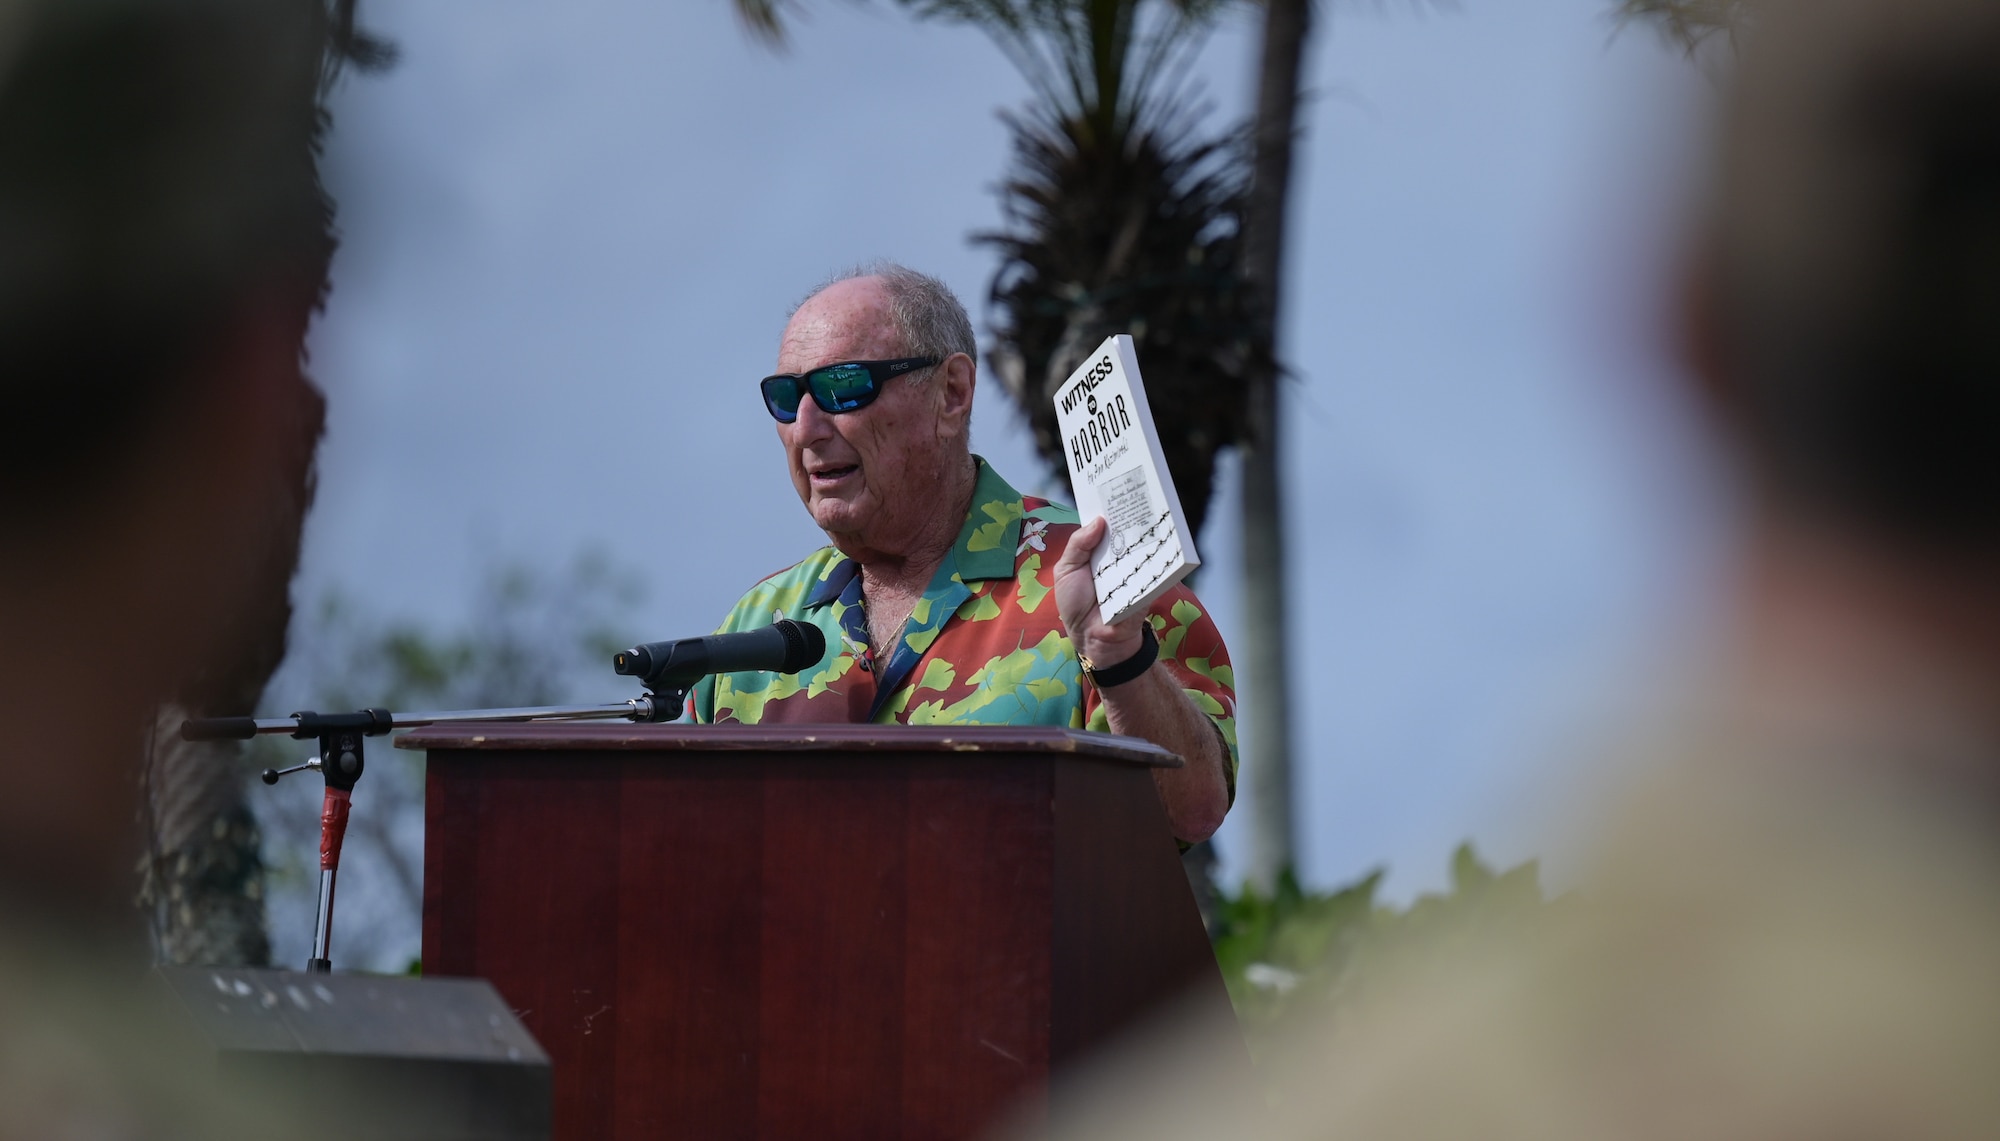 Seymour Kazimirski, the Holocaust Remembrance Ceremony keynote speaker, holds up a book written by his mother, a Holocaust survivor, during a Holocaust Remembrance Ceremony at the Missing Man Monument on Joint Base Pearl Harbor-Hickam, Hawaii, April 18, 2023. Kazimirski’s parents both escaped Nazi persecution during the Holocaust; he continues to share their stories and educate the local community. (U.S. Air Force photo by Staff Sgt. Alan Ricker)